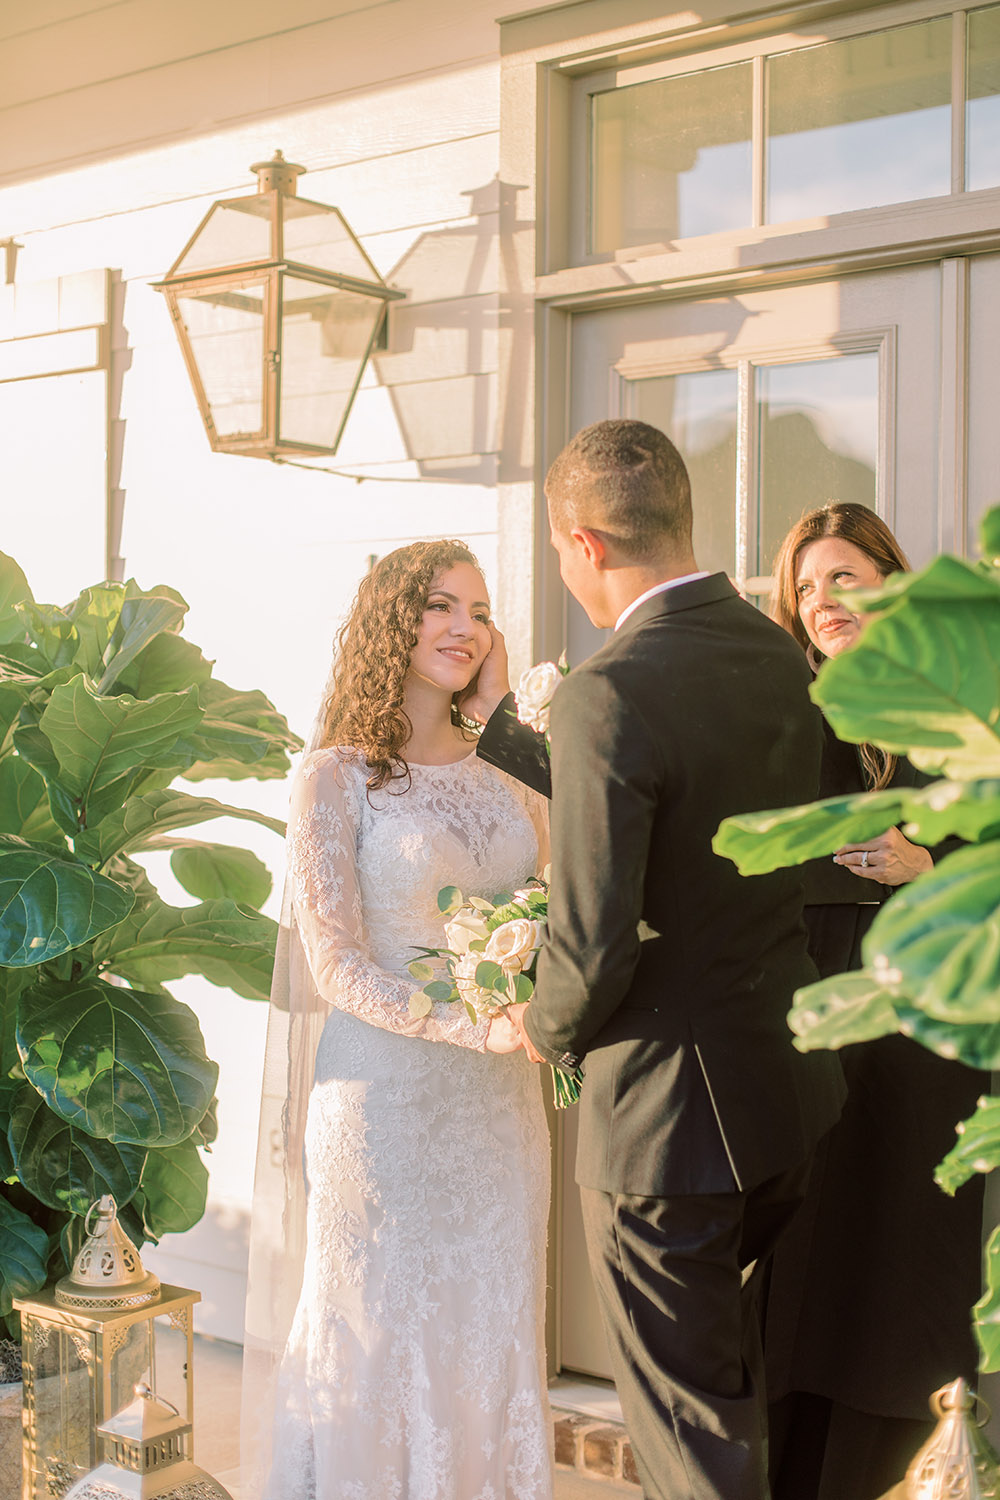 A bride and groom exchange vows during a front porch wedding ceremony. Photo: Ashley Kristen Photography